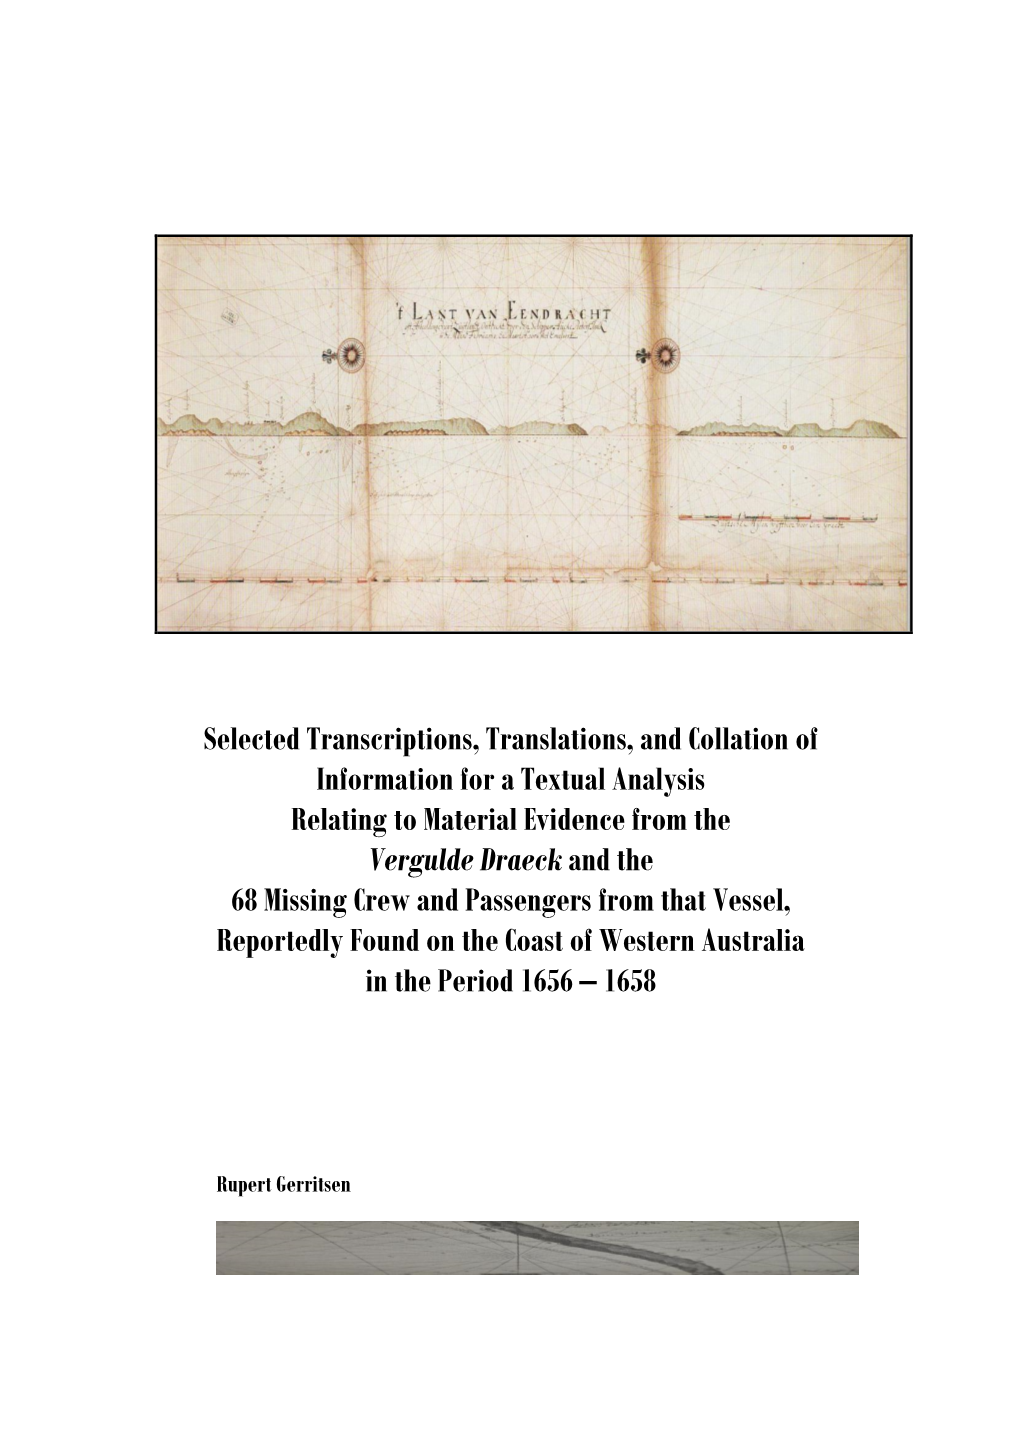 Selected Transcriptions, Translations, and Collation of Information for A